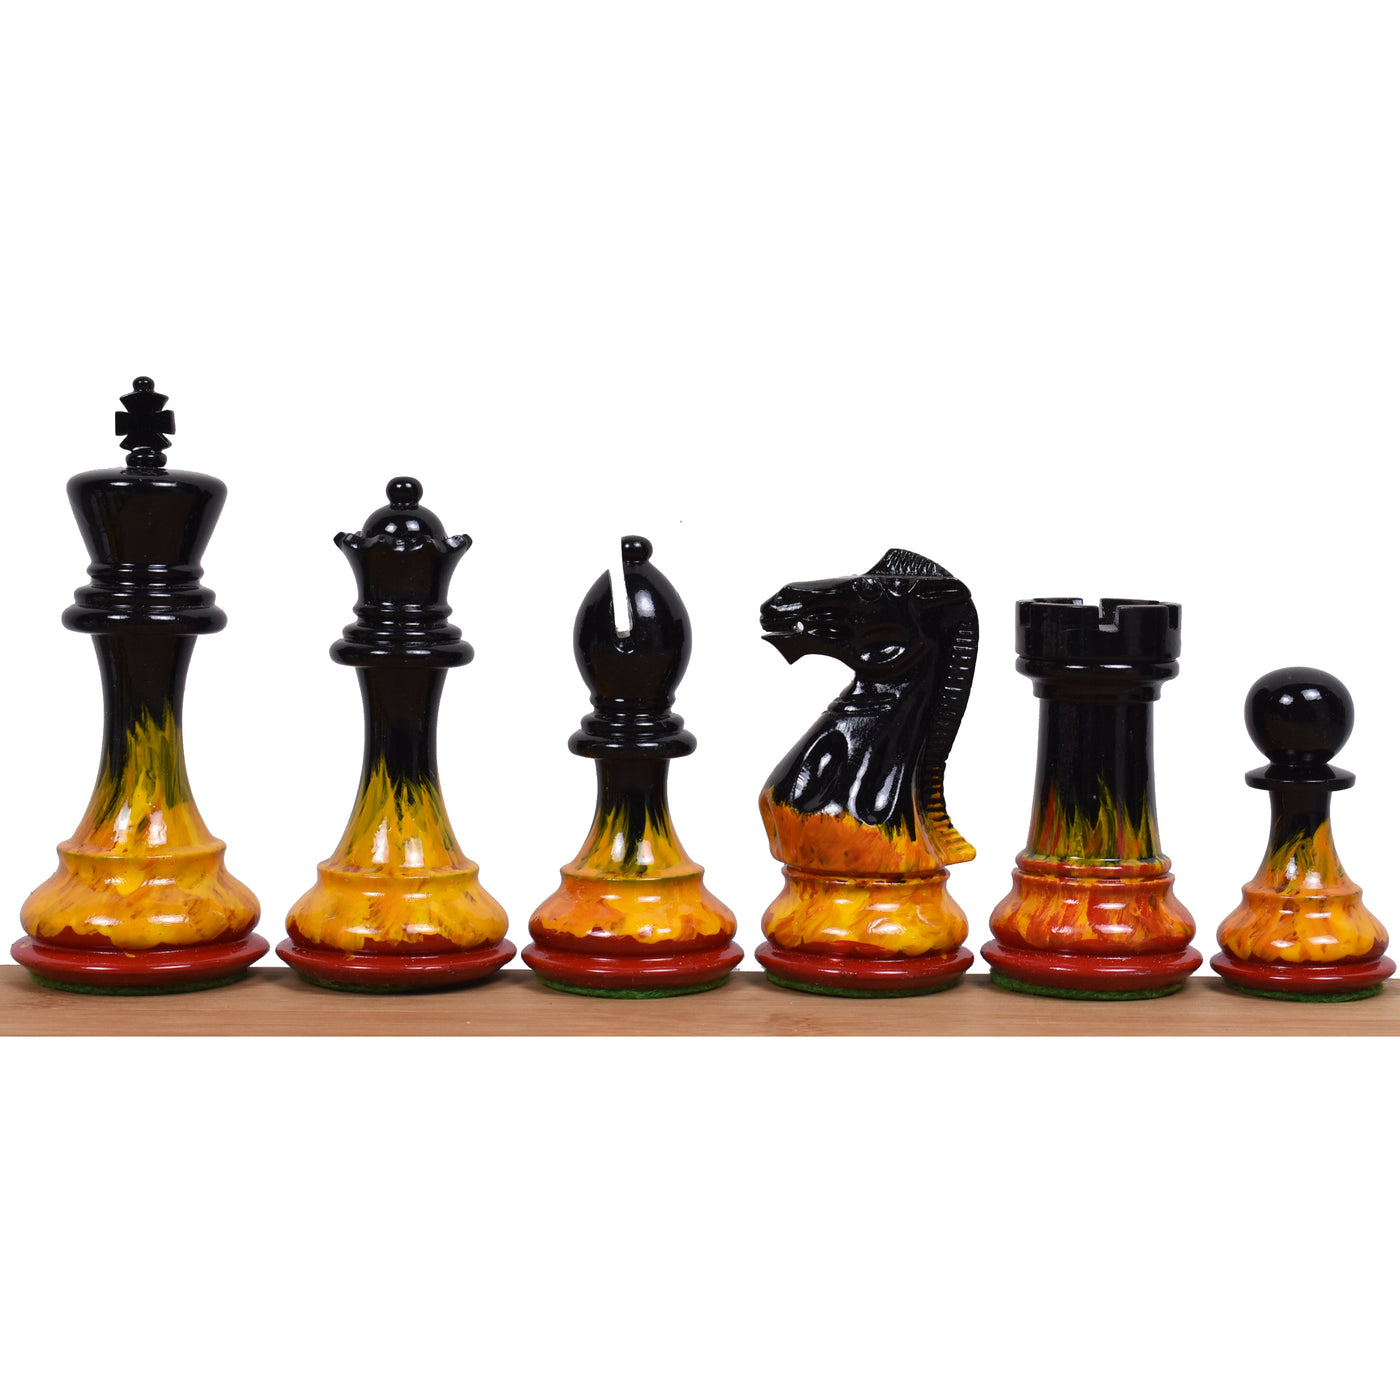 4.1" Fire & Ice Painted Staunton Weighted Wooden Chess Pieces with 17.7" Solid Ebony & Maple Wood Board and Leatherette Coffer Storage Box